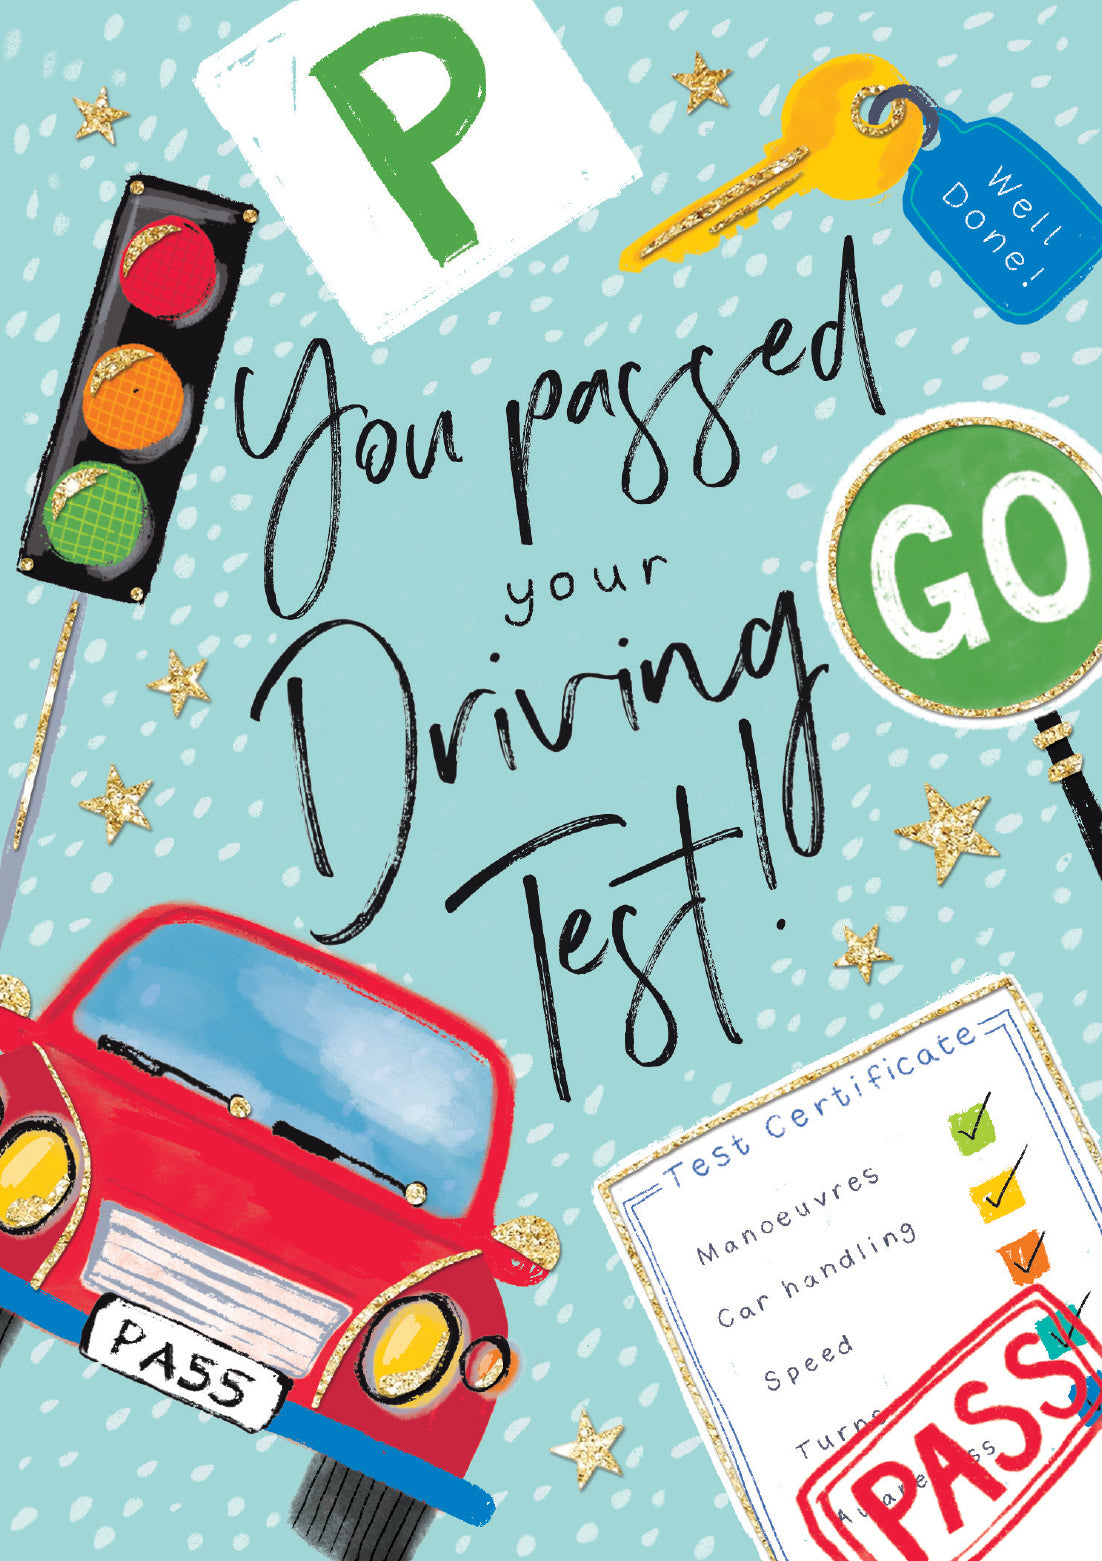 You Passed Your Driving Test Icons Card from Penny Black